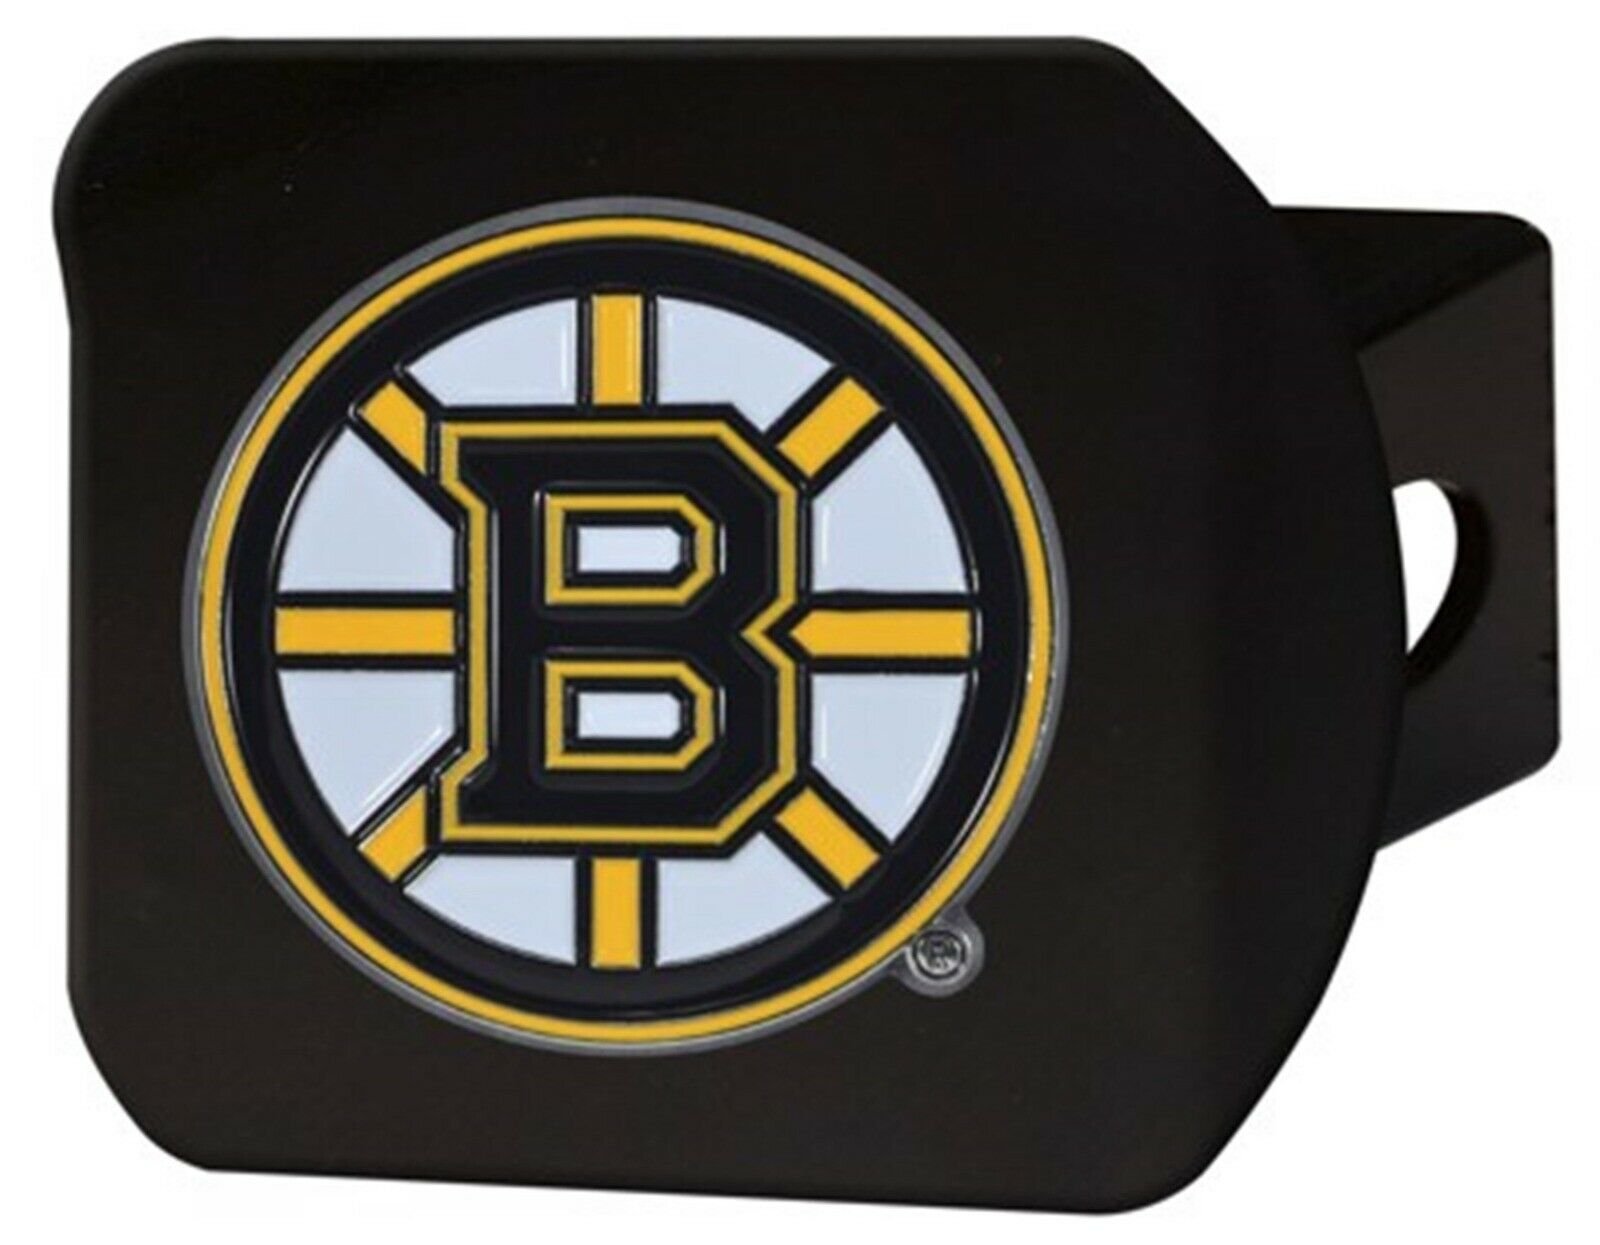 Boston Bruins Hitch Cover Black Solid Metal with Raised Color Metal Emblem 2" Square Type III